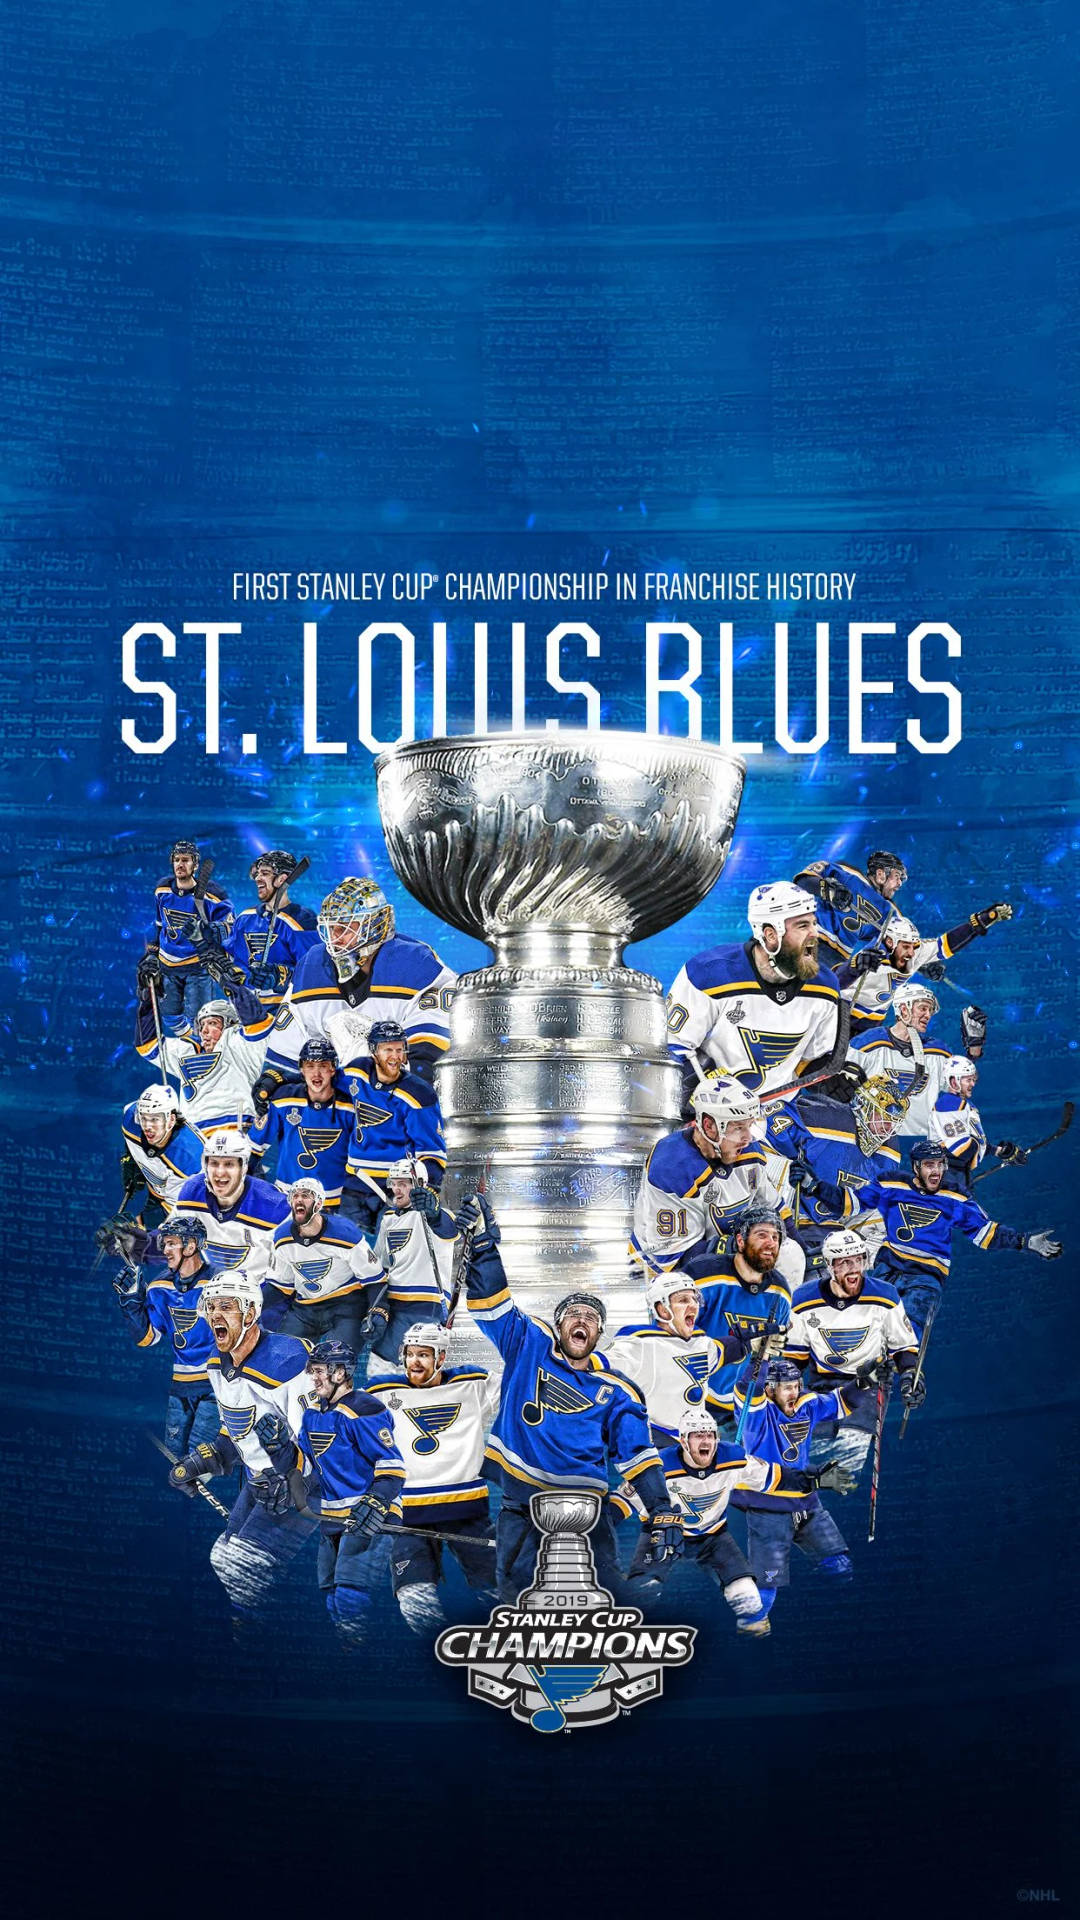 Stanley Cup Champion St. Louis Blues Celebrating Victory Wallpaper